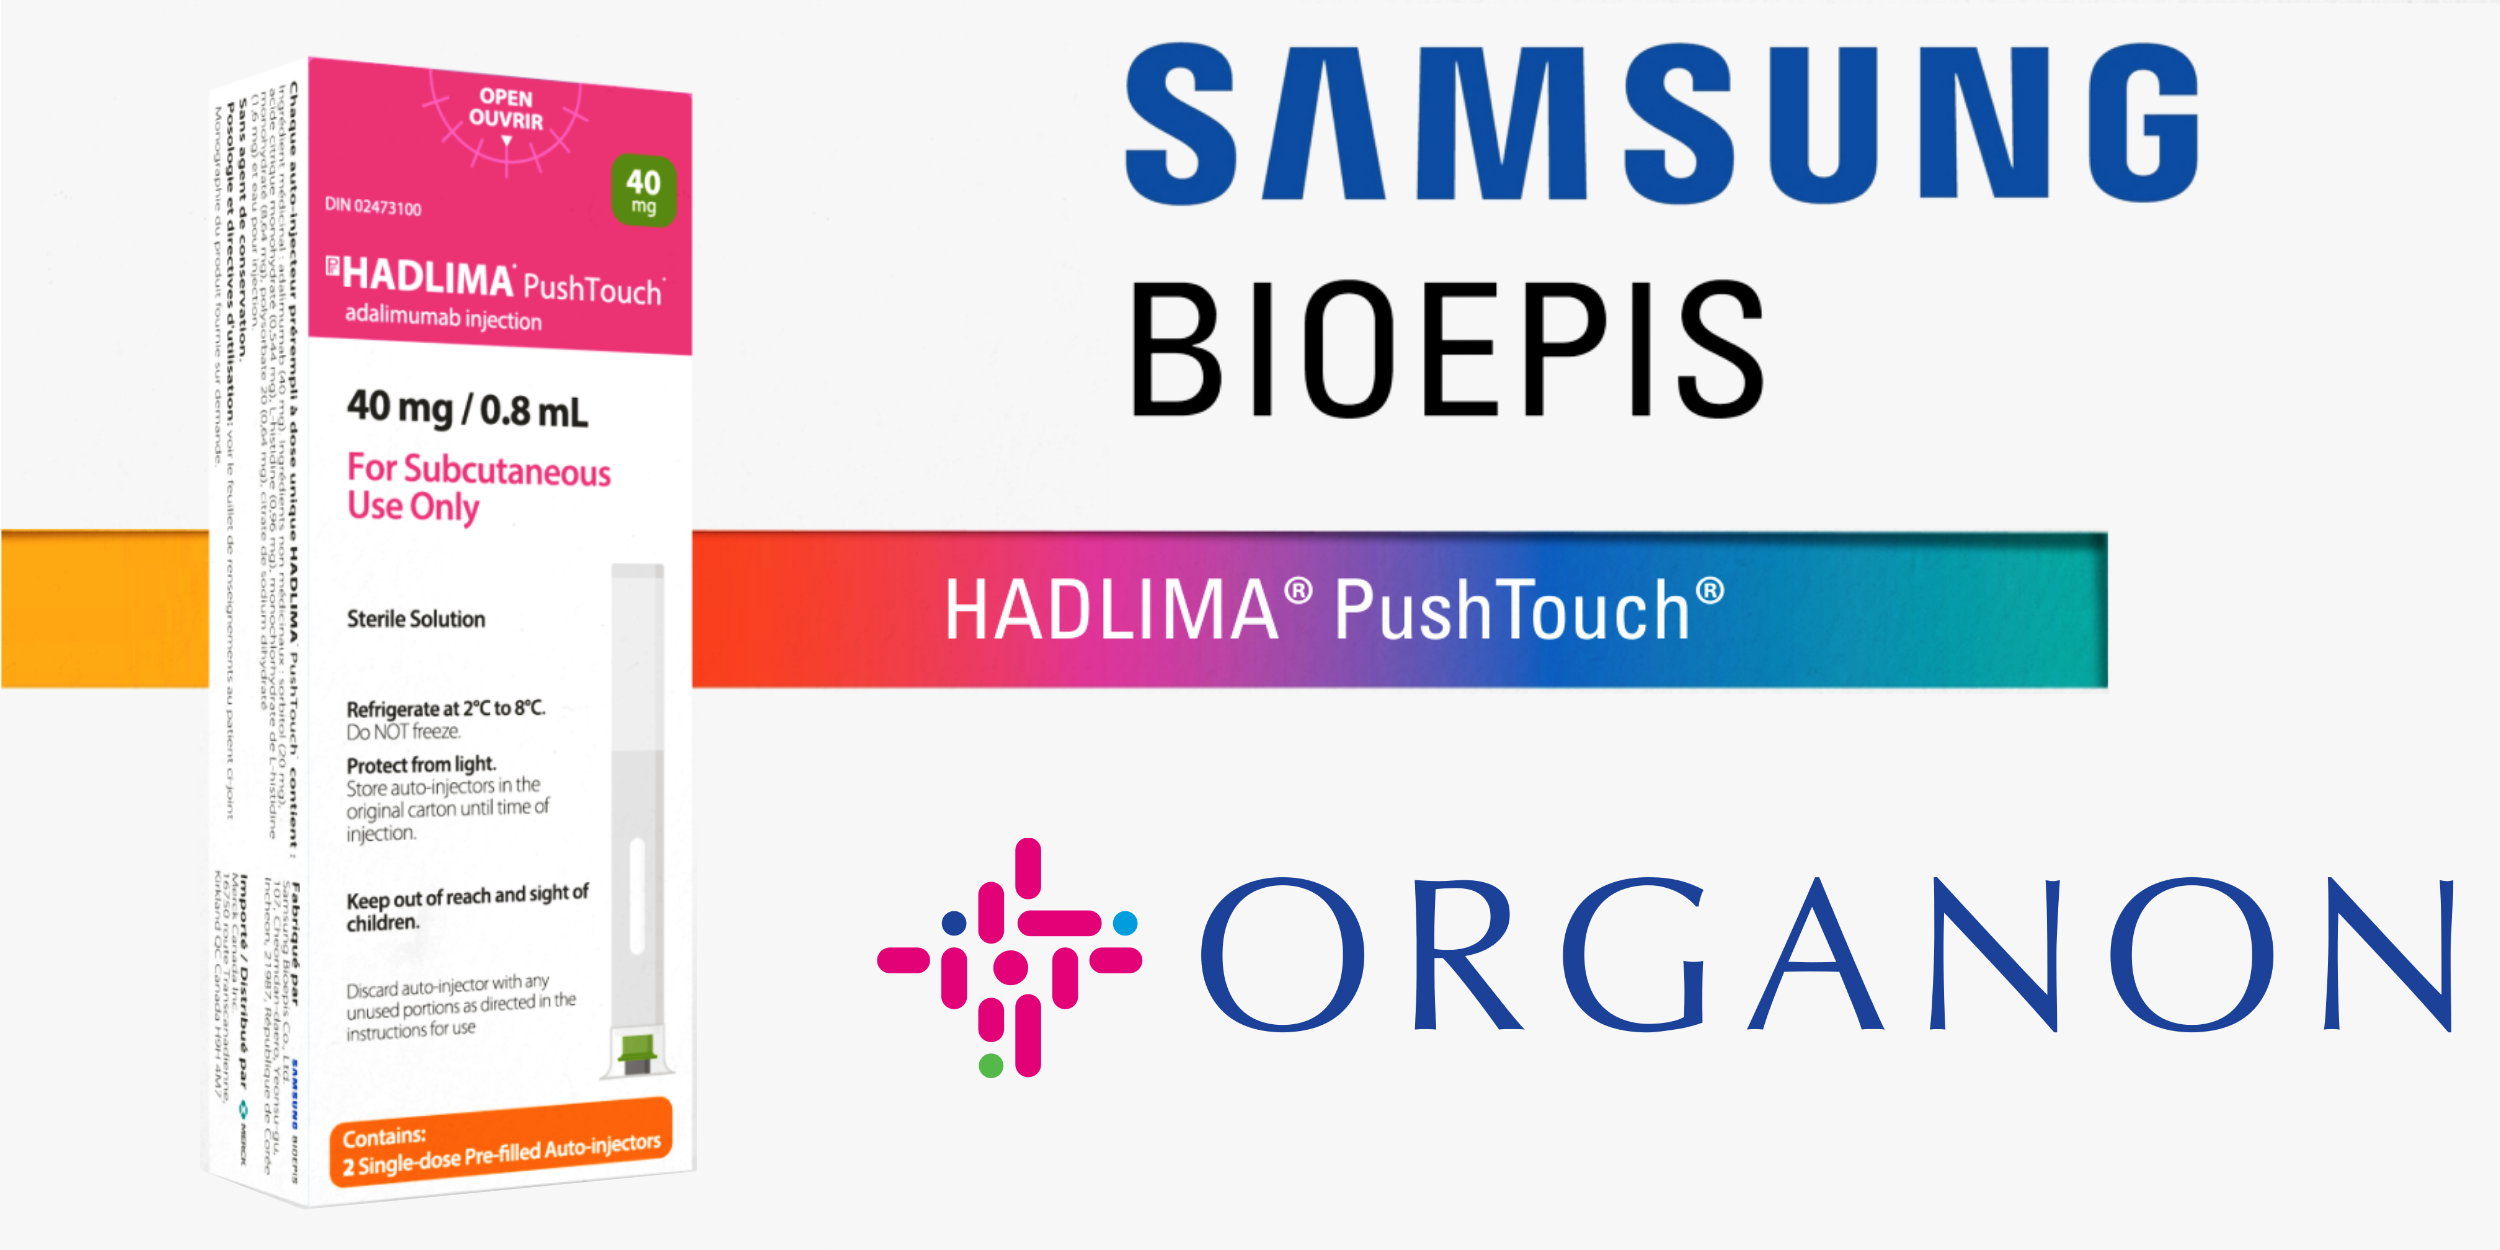 image of a box of Hadlima with the Organon and Samsung Bioepis logos near it